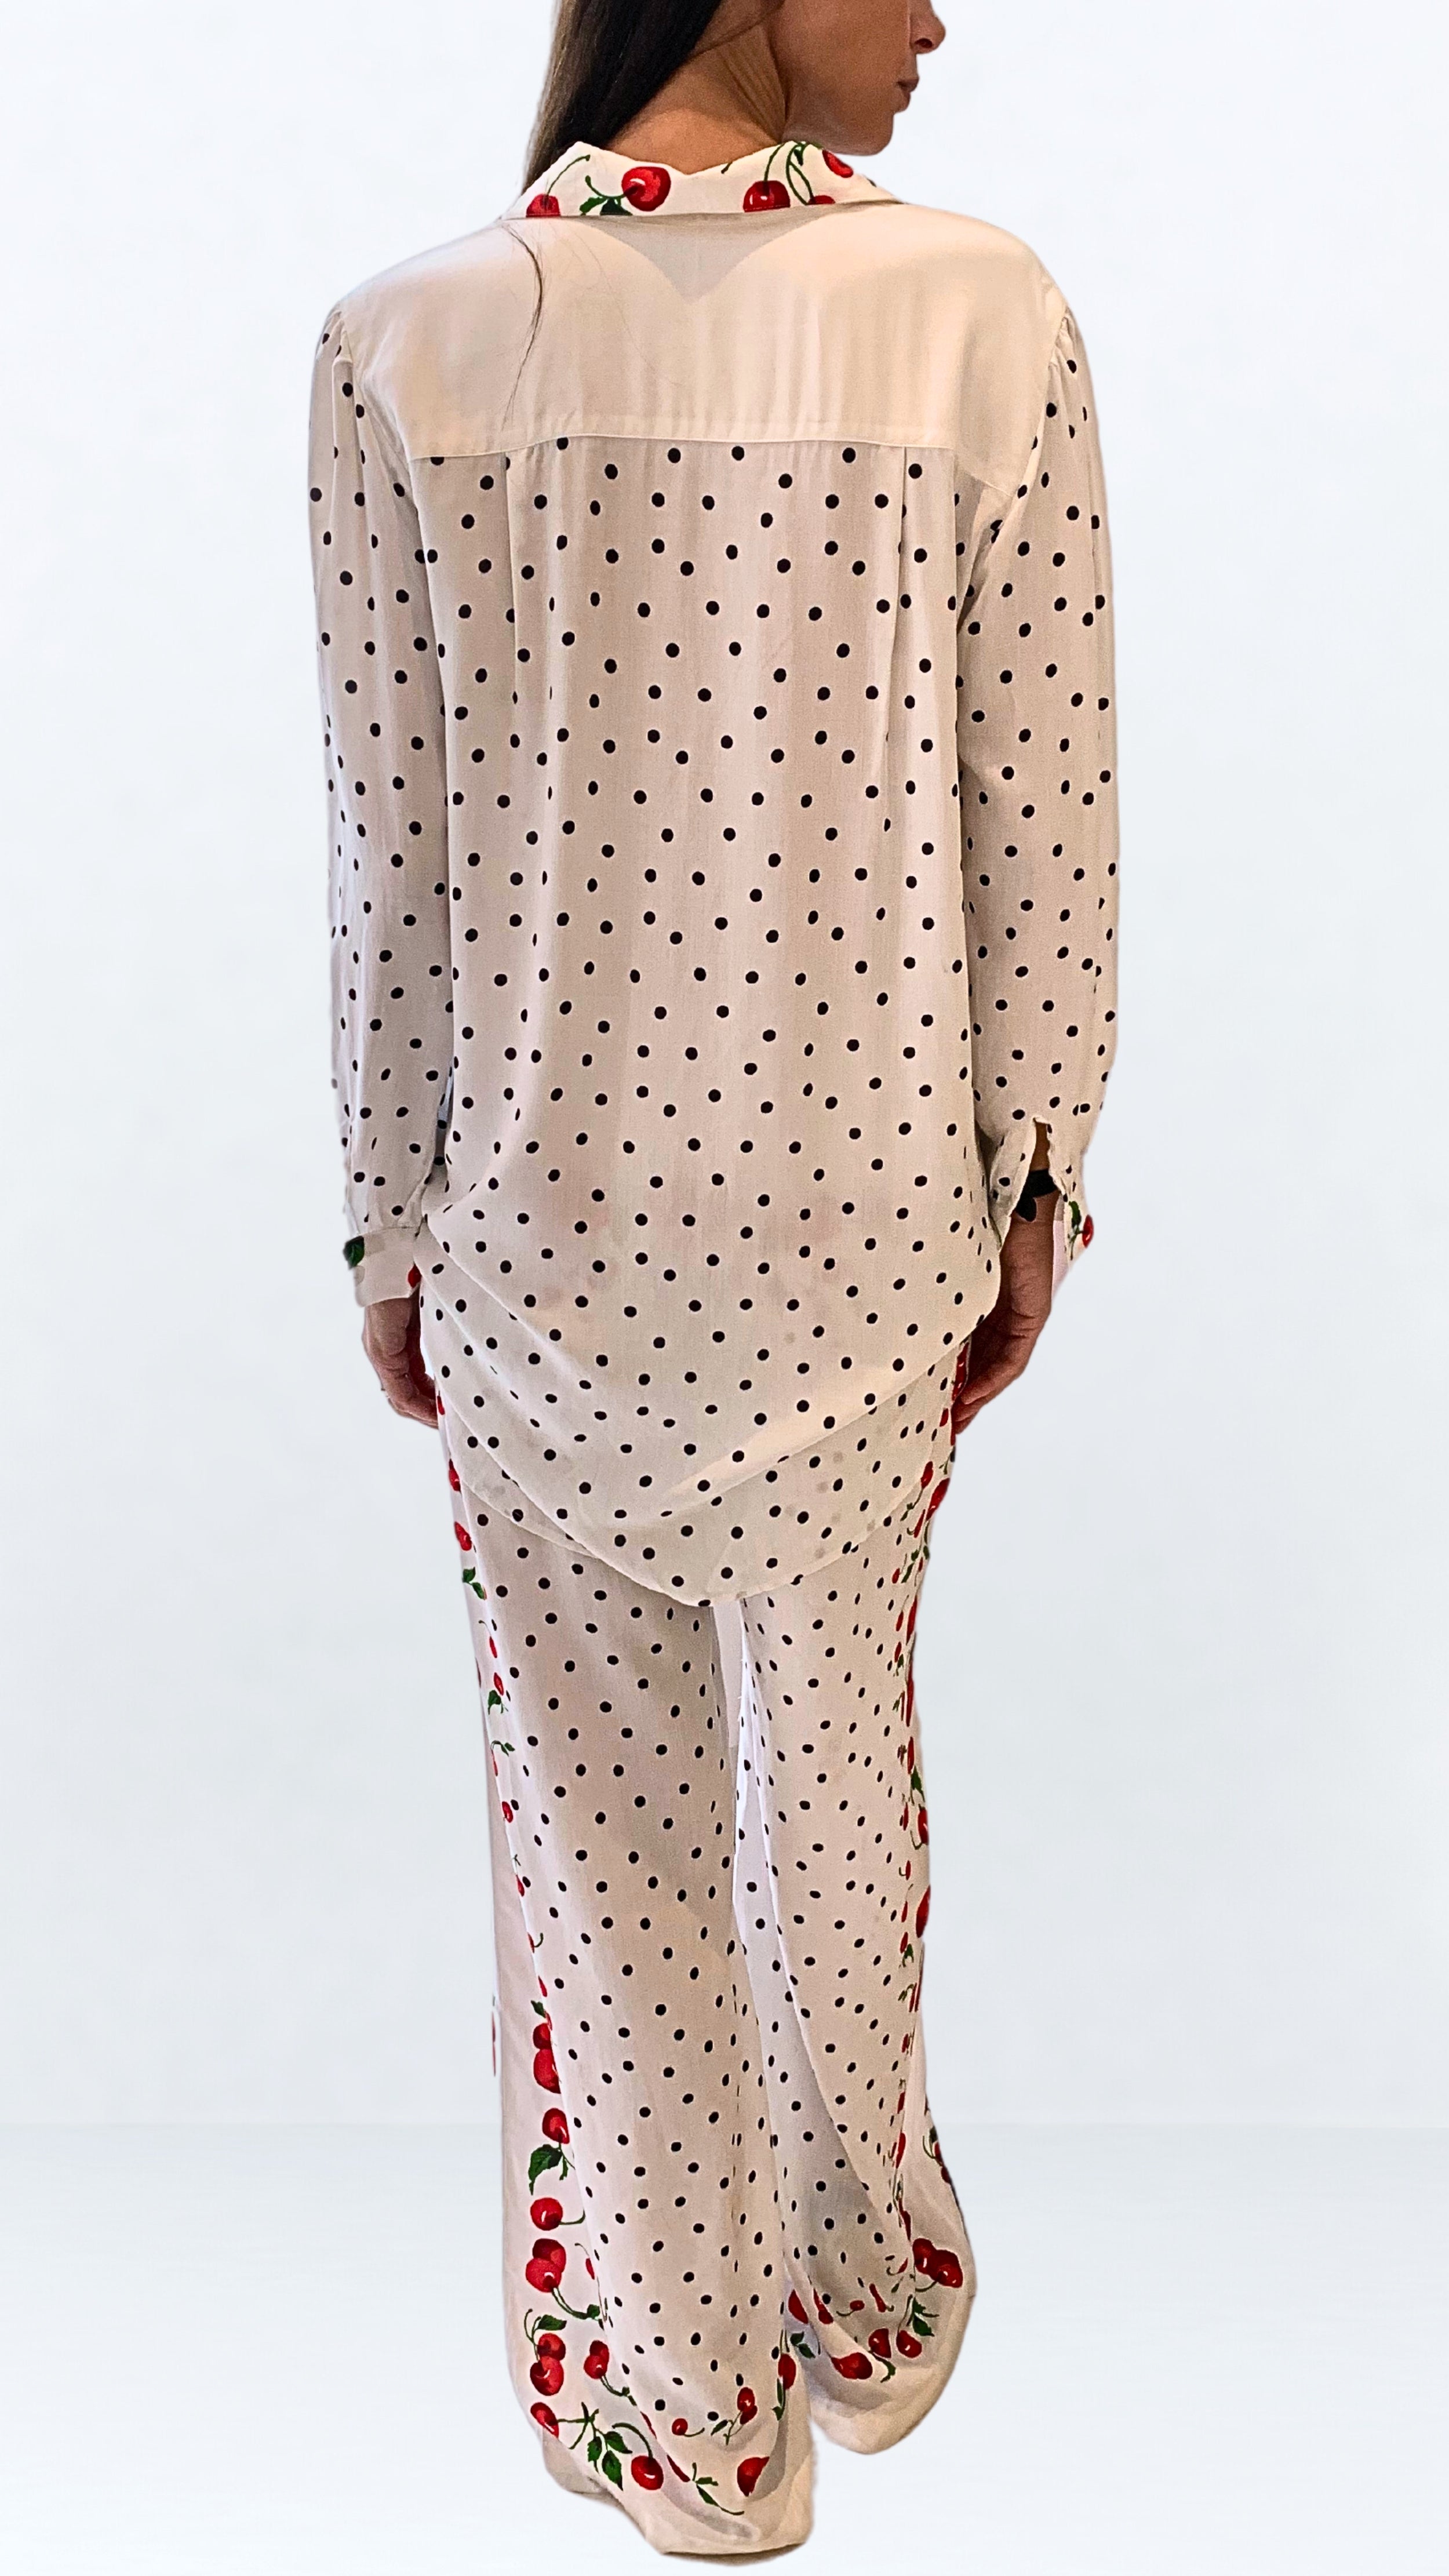 Leslie Amon Oversized Shirt in White Cherry. Oversized blouse in white with red cherry pattern. With button closures up the front, buttoned cuffs and collar. Product photo shown from the back.